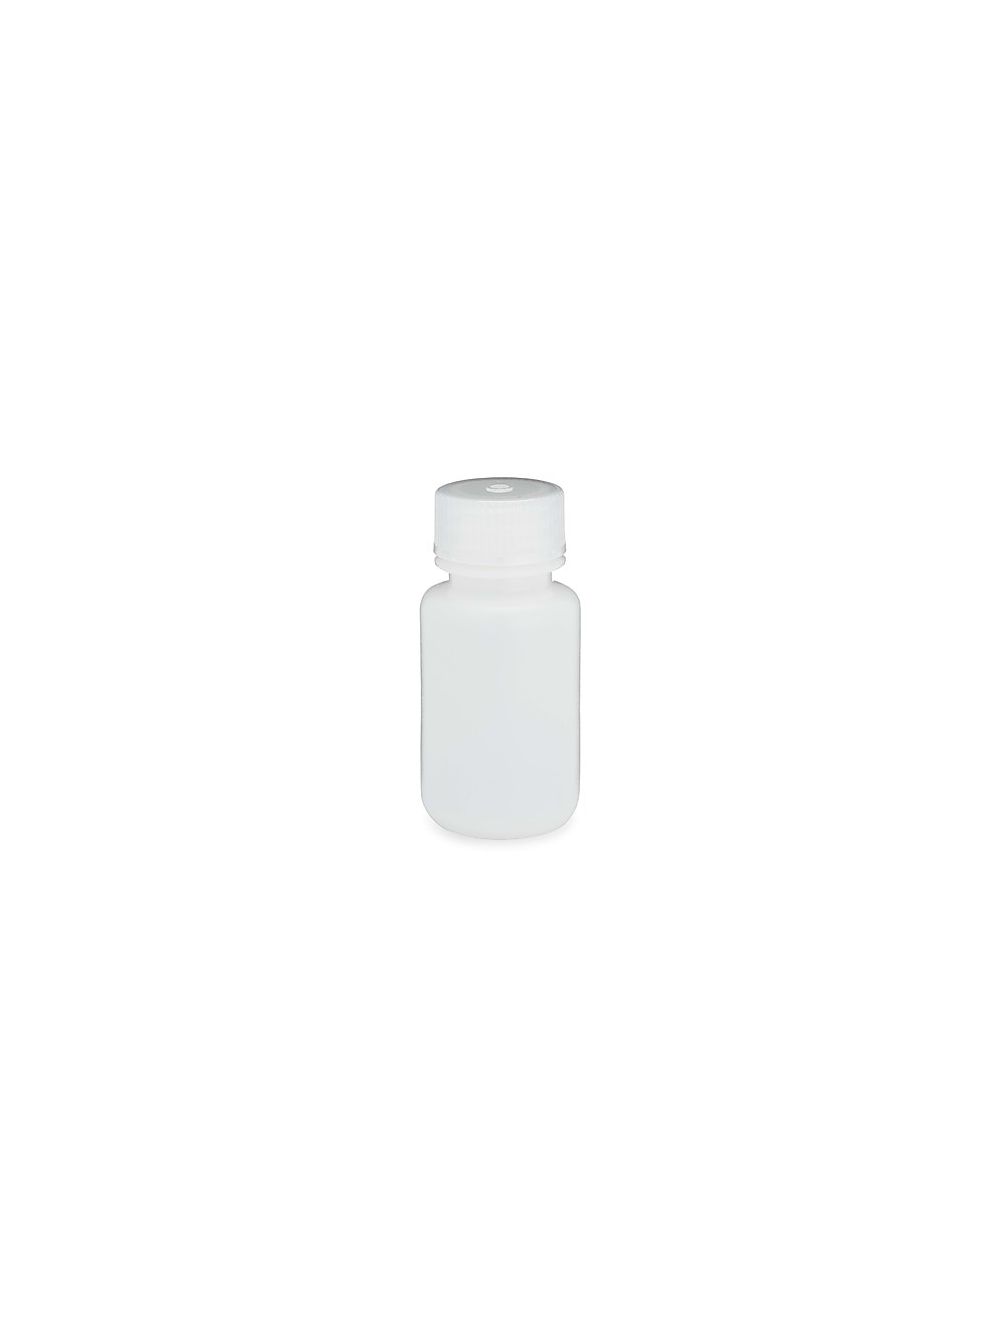 HDPE Plastic Bottles with white Caps Lot of 12 2 oz 60 ml 